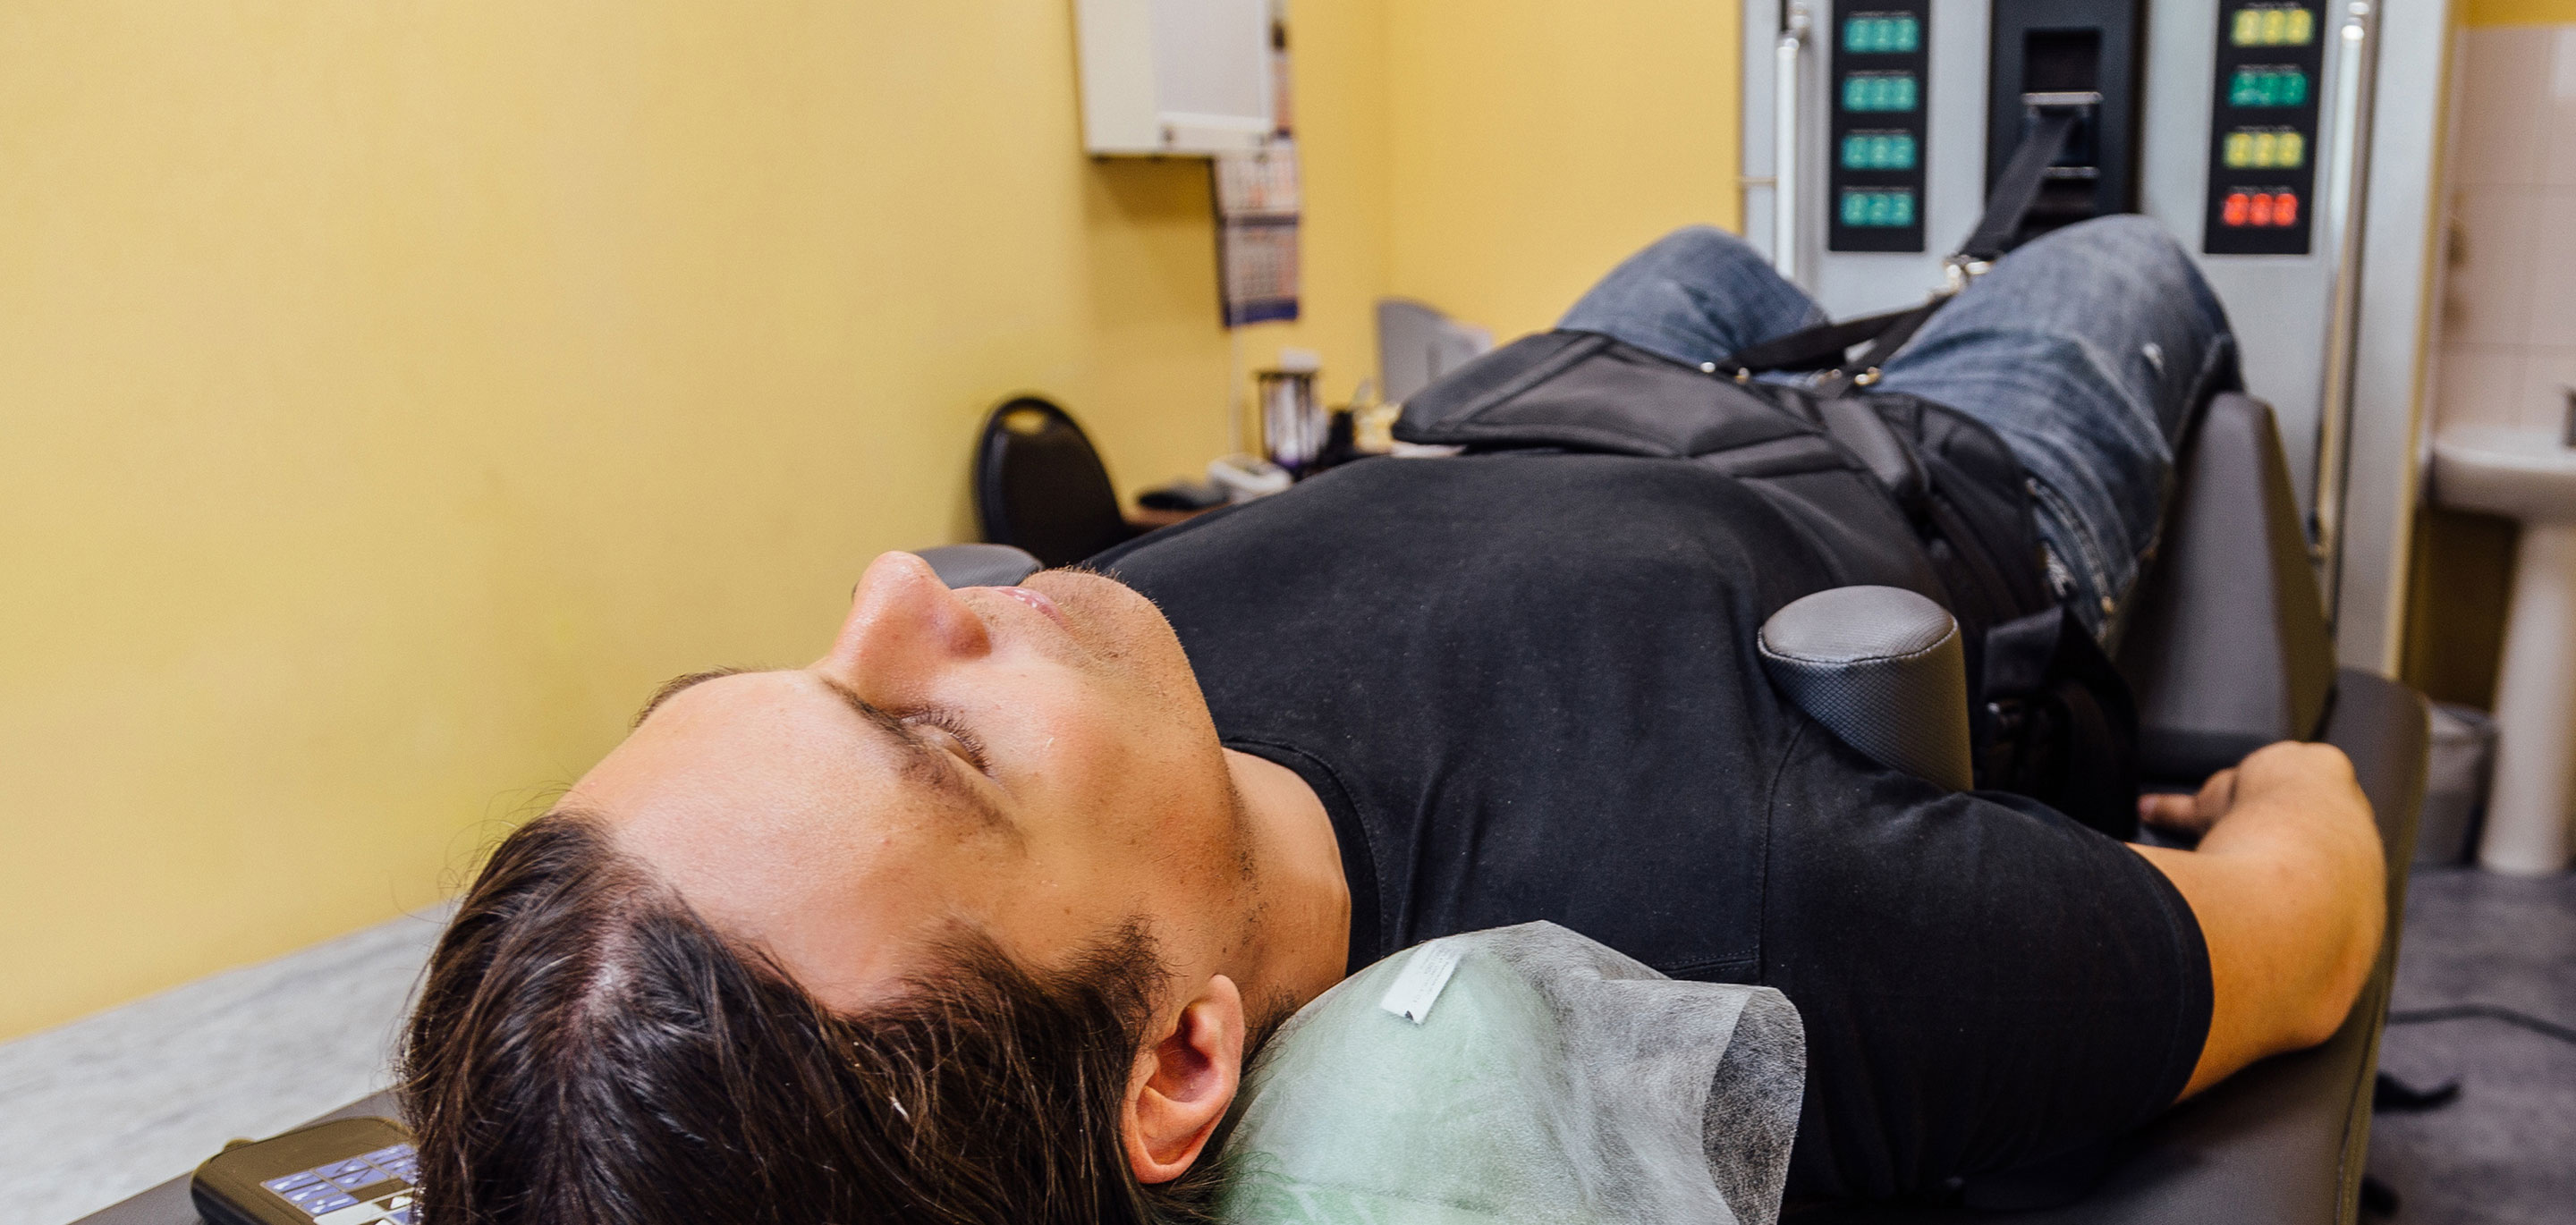 Spinal Decompression Therapy